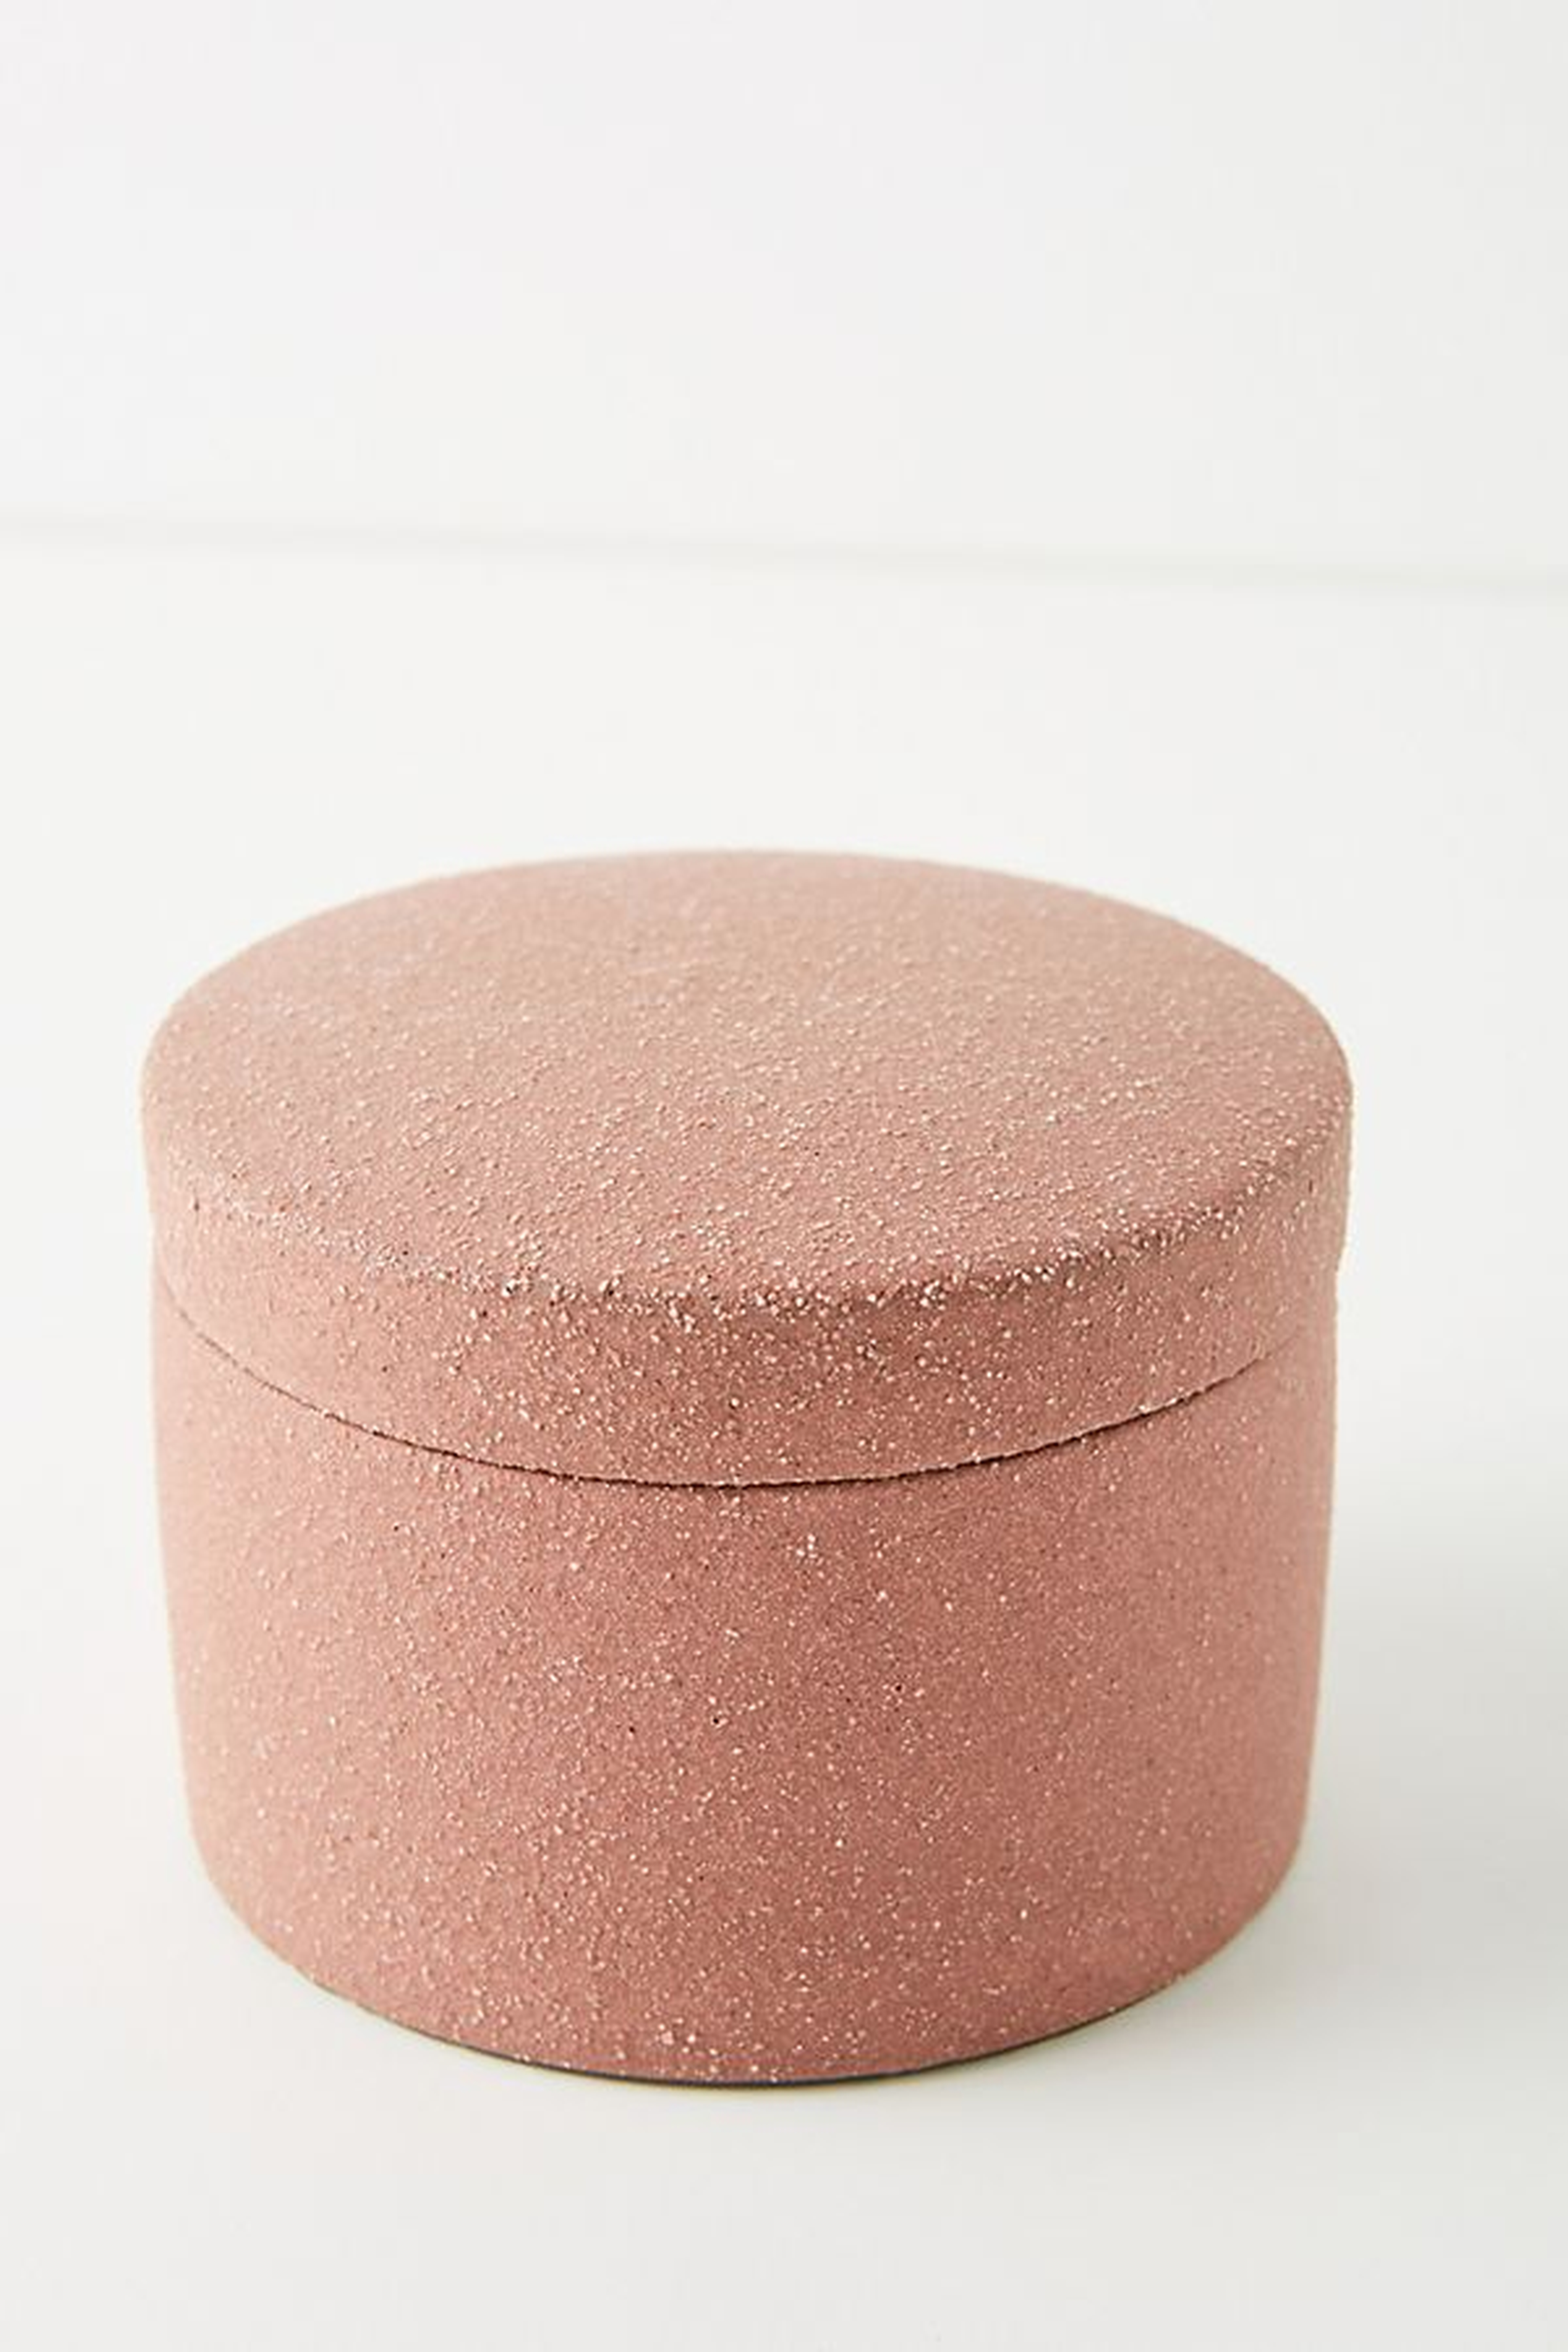 Galena Canister - Anthropologie